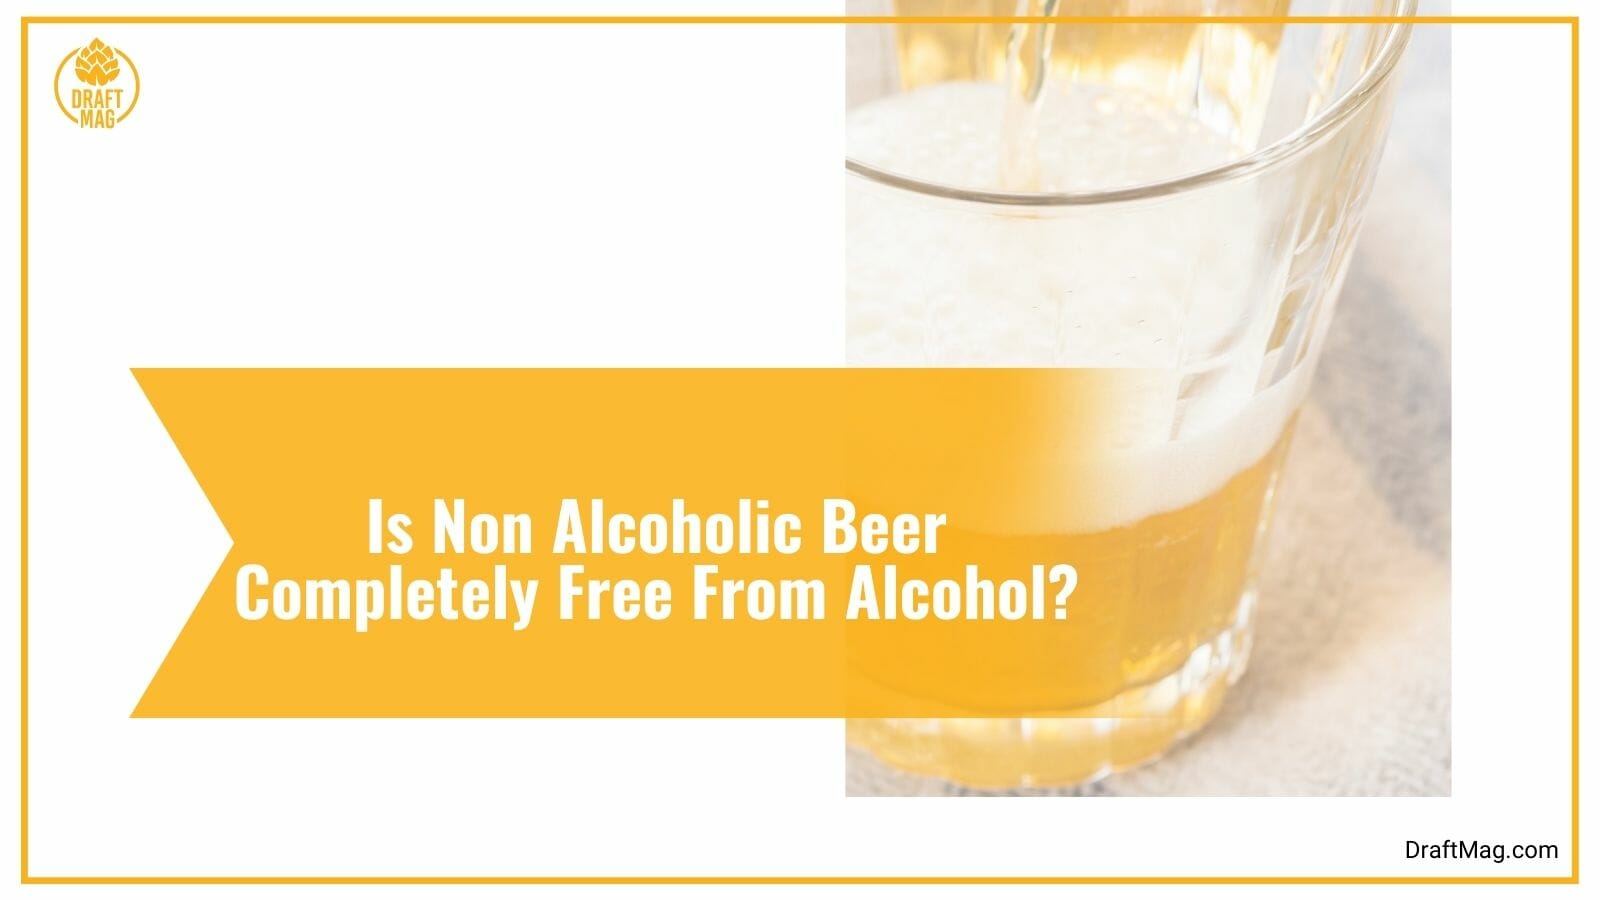 Is Non Alcoholic Beer Completely Free From Alcohol